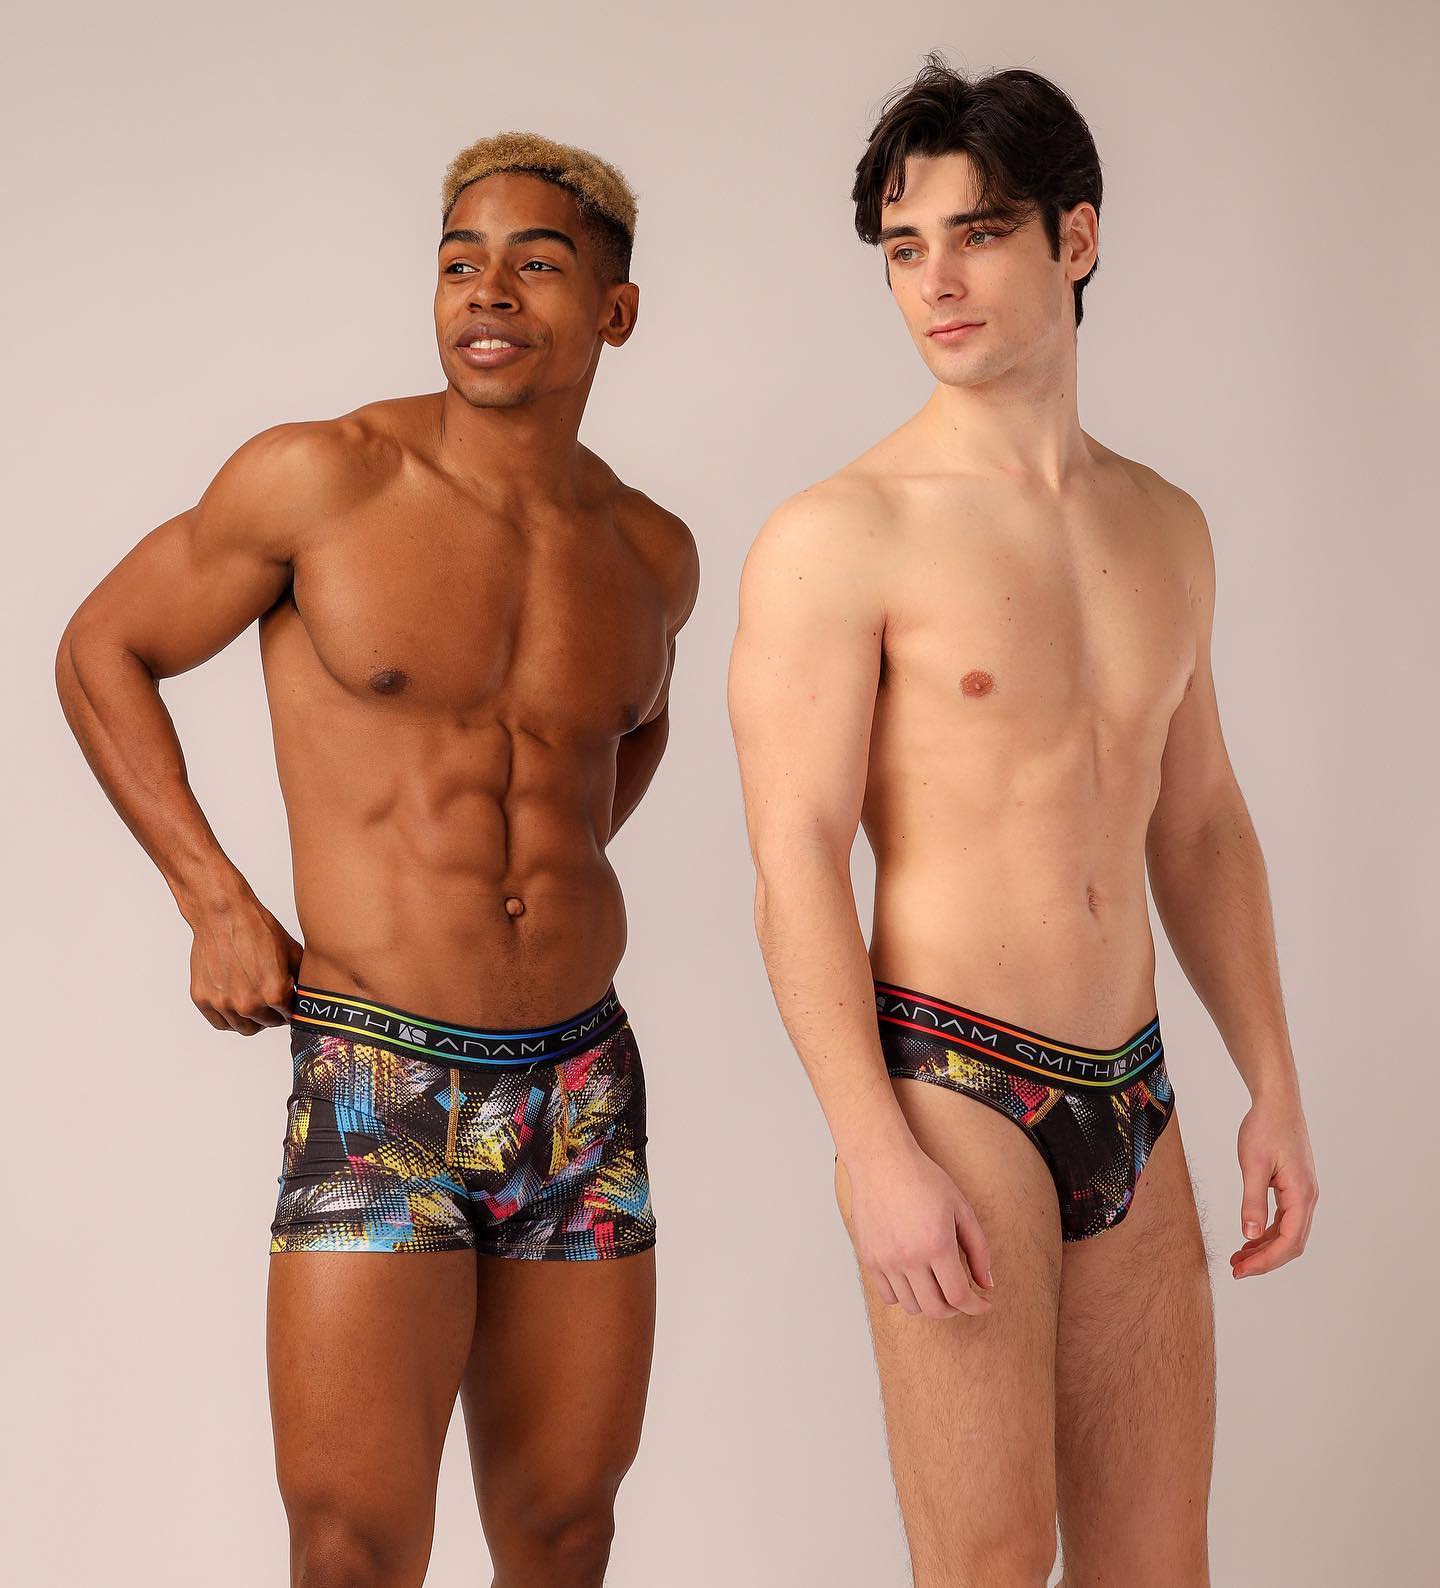 Read in our magazine today: The Adorable collection of Adam Smith is back in our store! See more about this fashionable underwear line:
____
https://www.menandunderwear.com/2022/09/adam-smith-the-adorable-collection-is-back.html